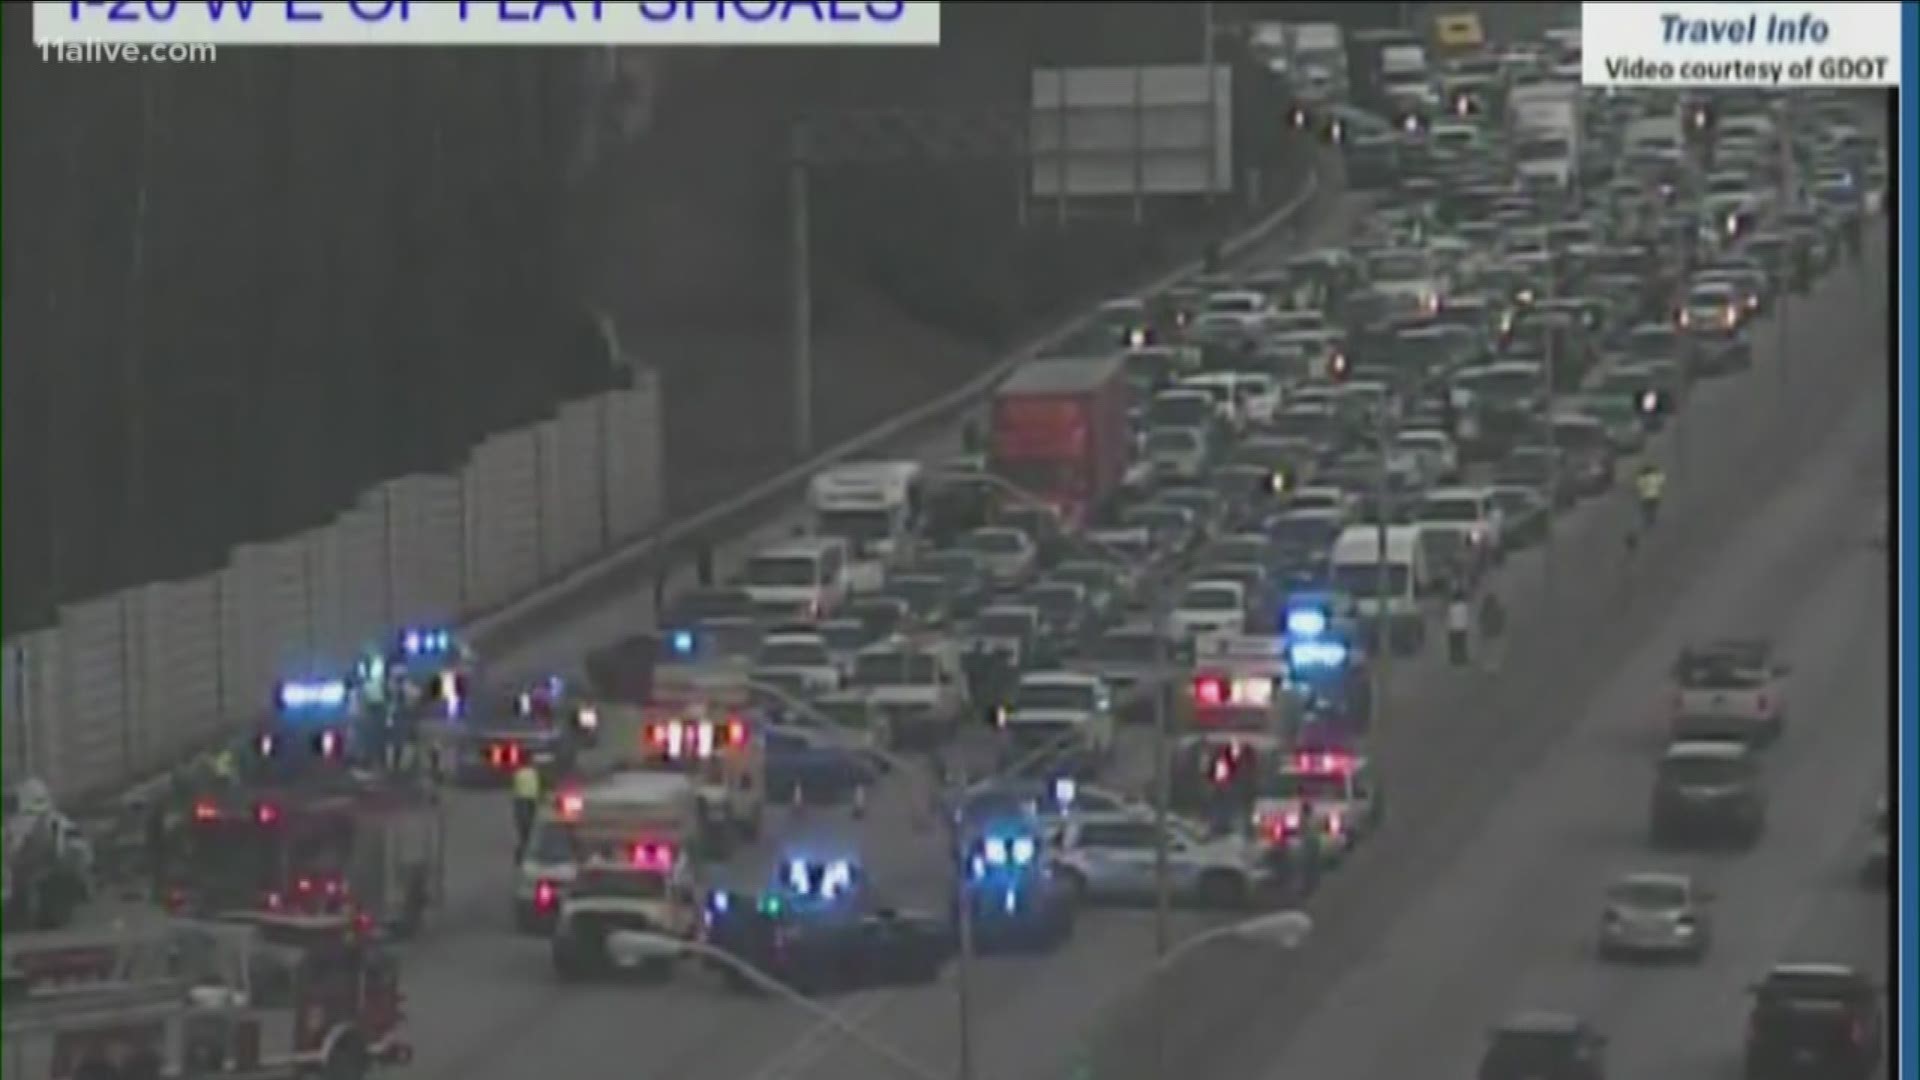 HERO officials said at least three people are hurt in a big accident on I-20 westbound in DeKalb County near Flat Shoals Rd.